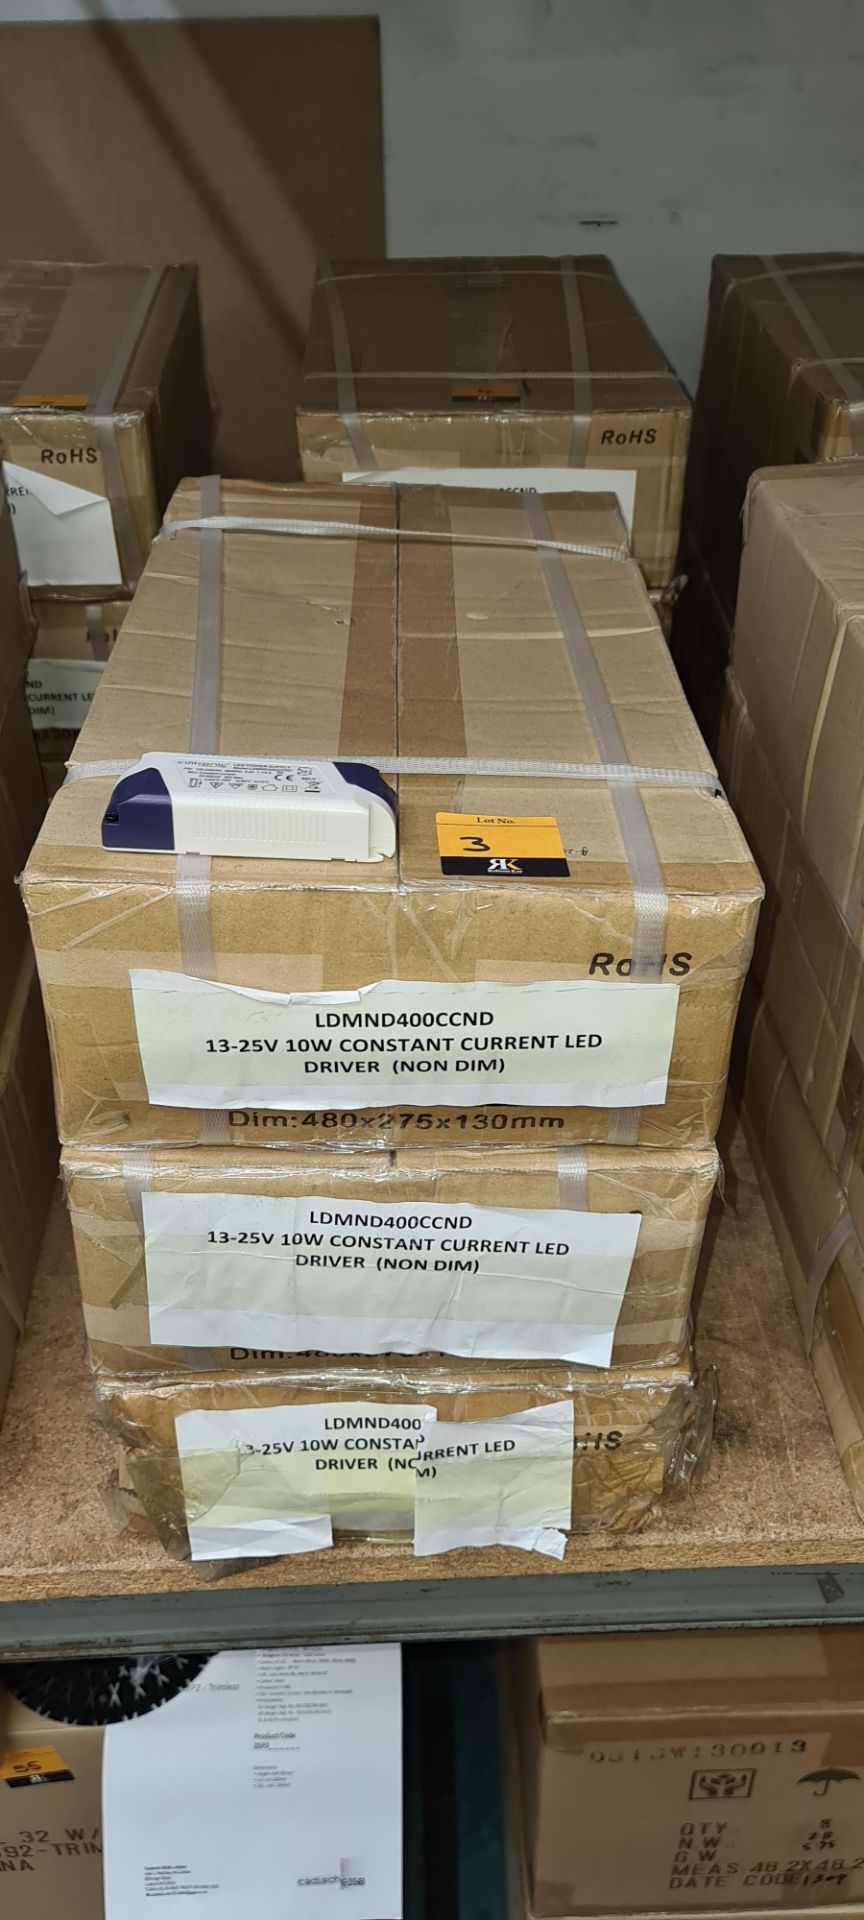 288 off Infitronic LED power supplies model LDMND400CCND - 3 boxes - Image 2 of 6